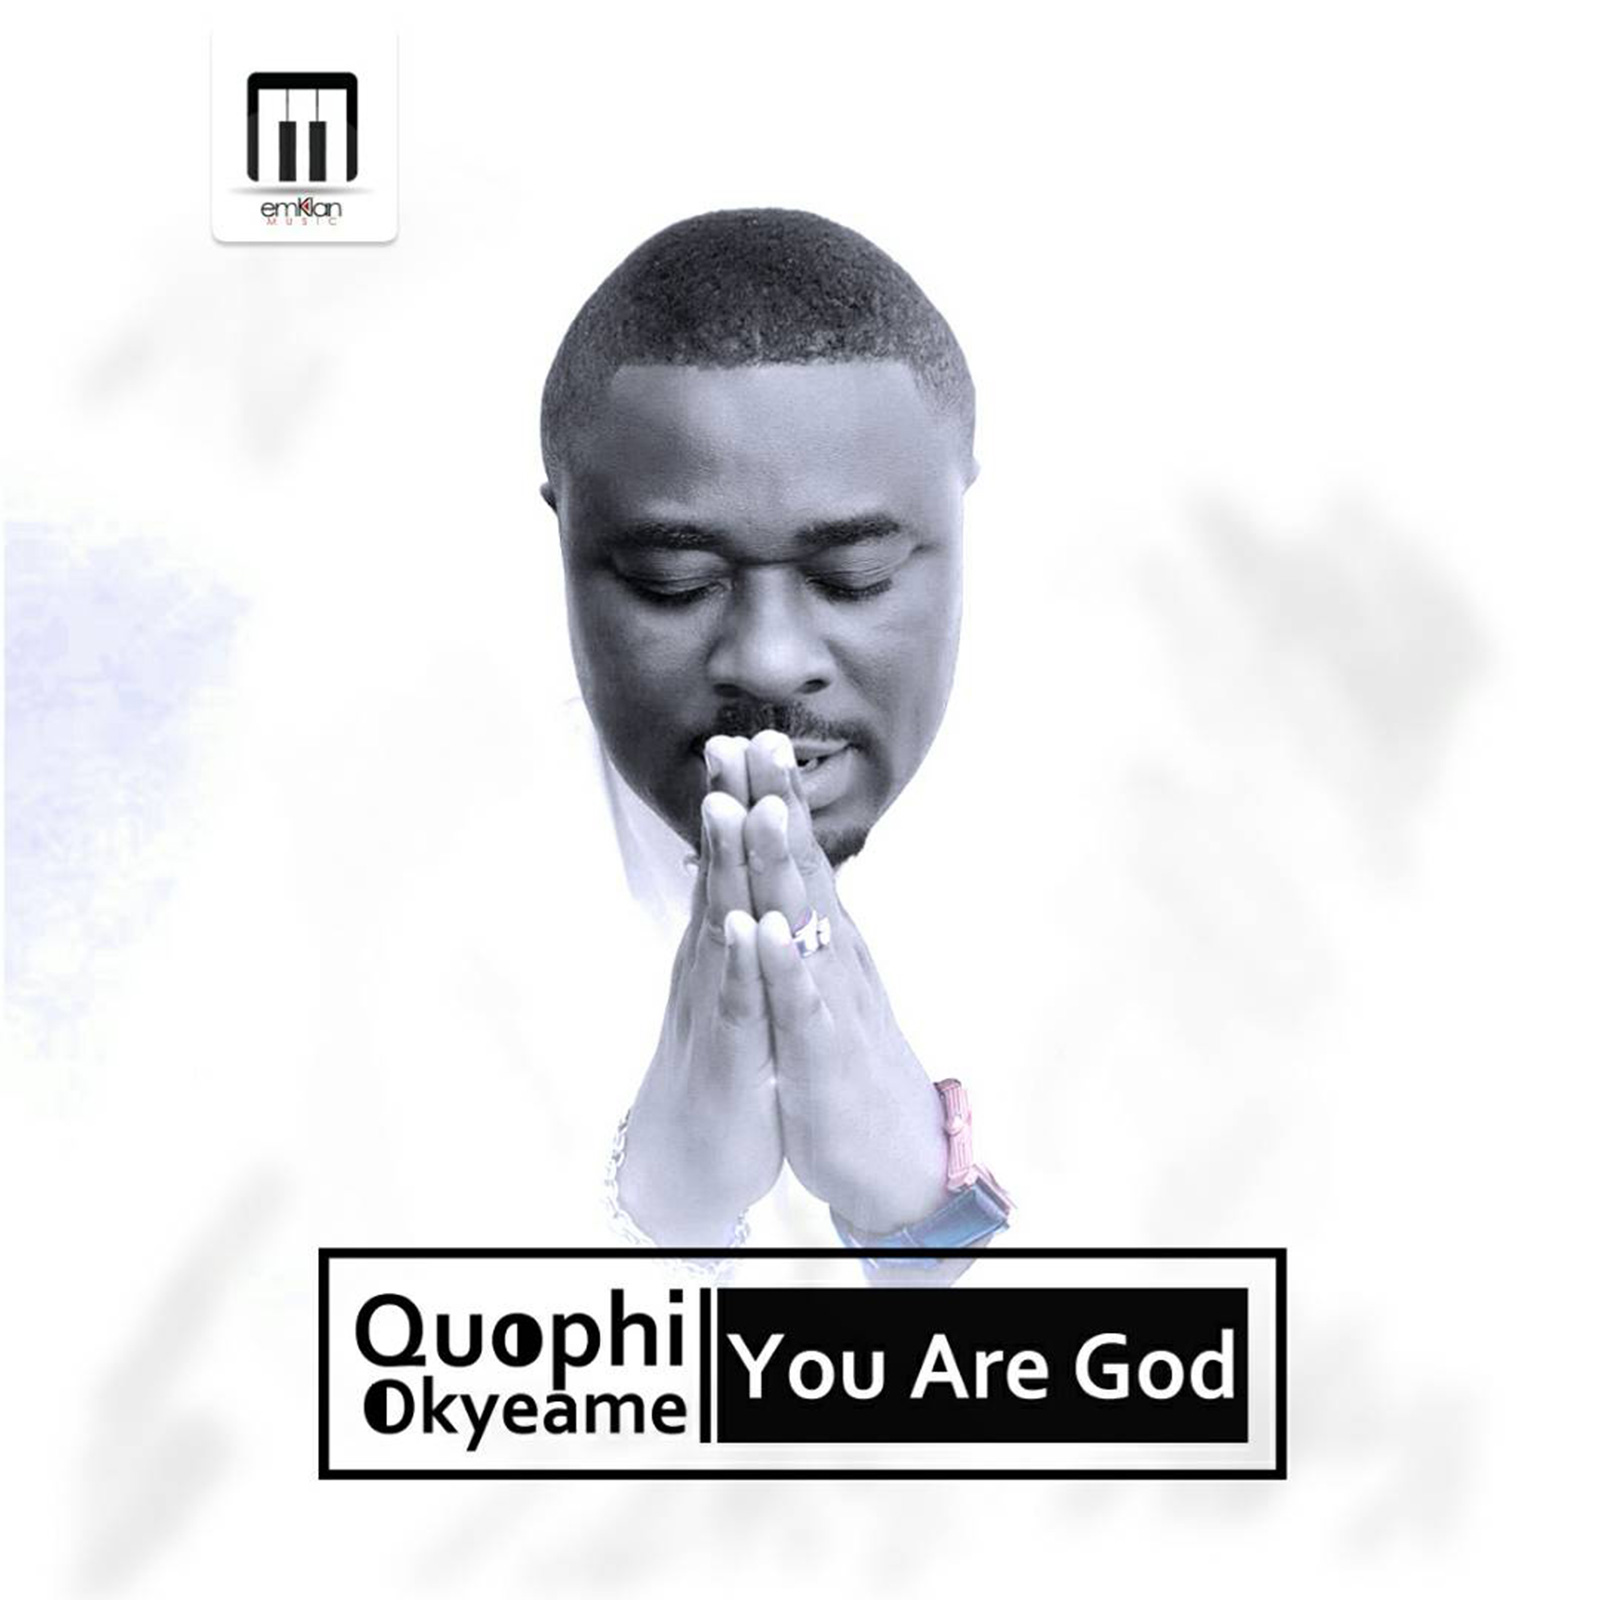 You Are God by Quophi Okyeame